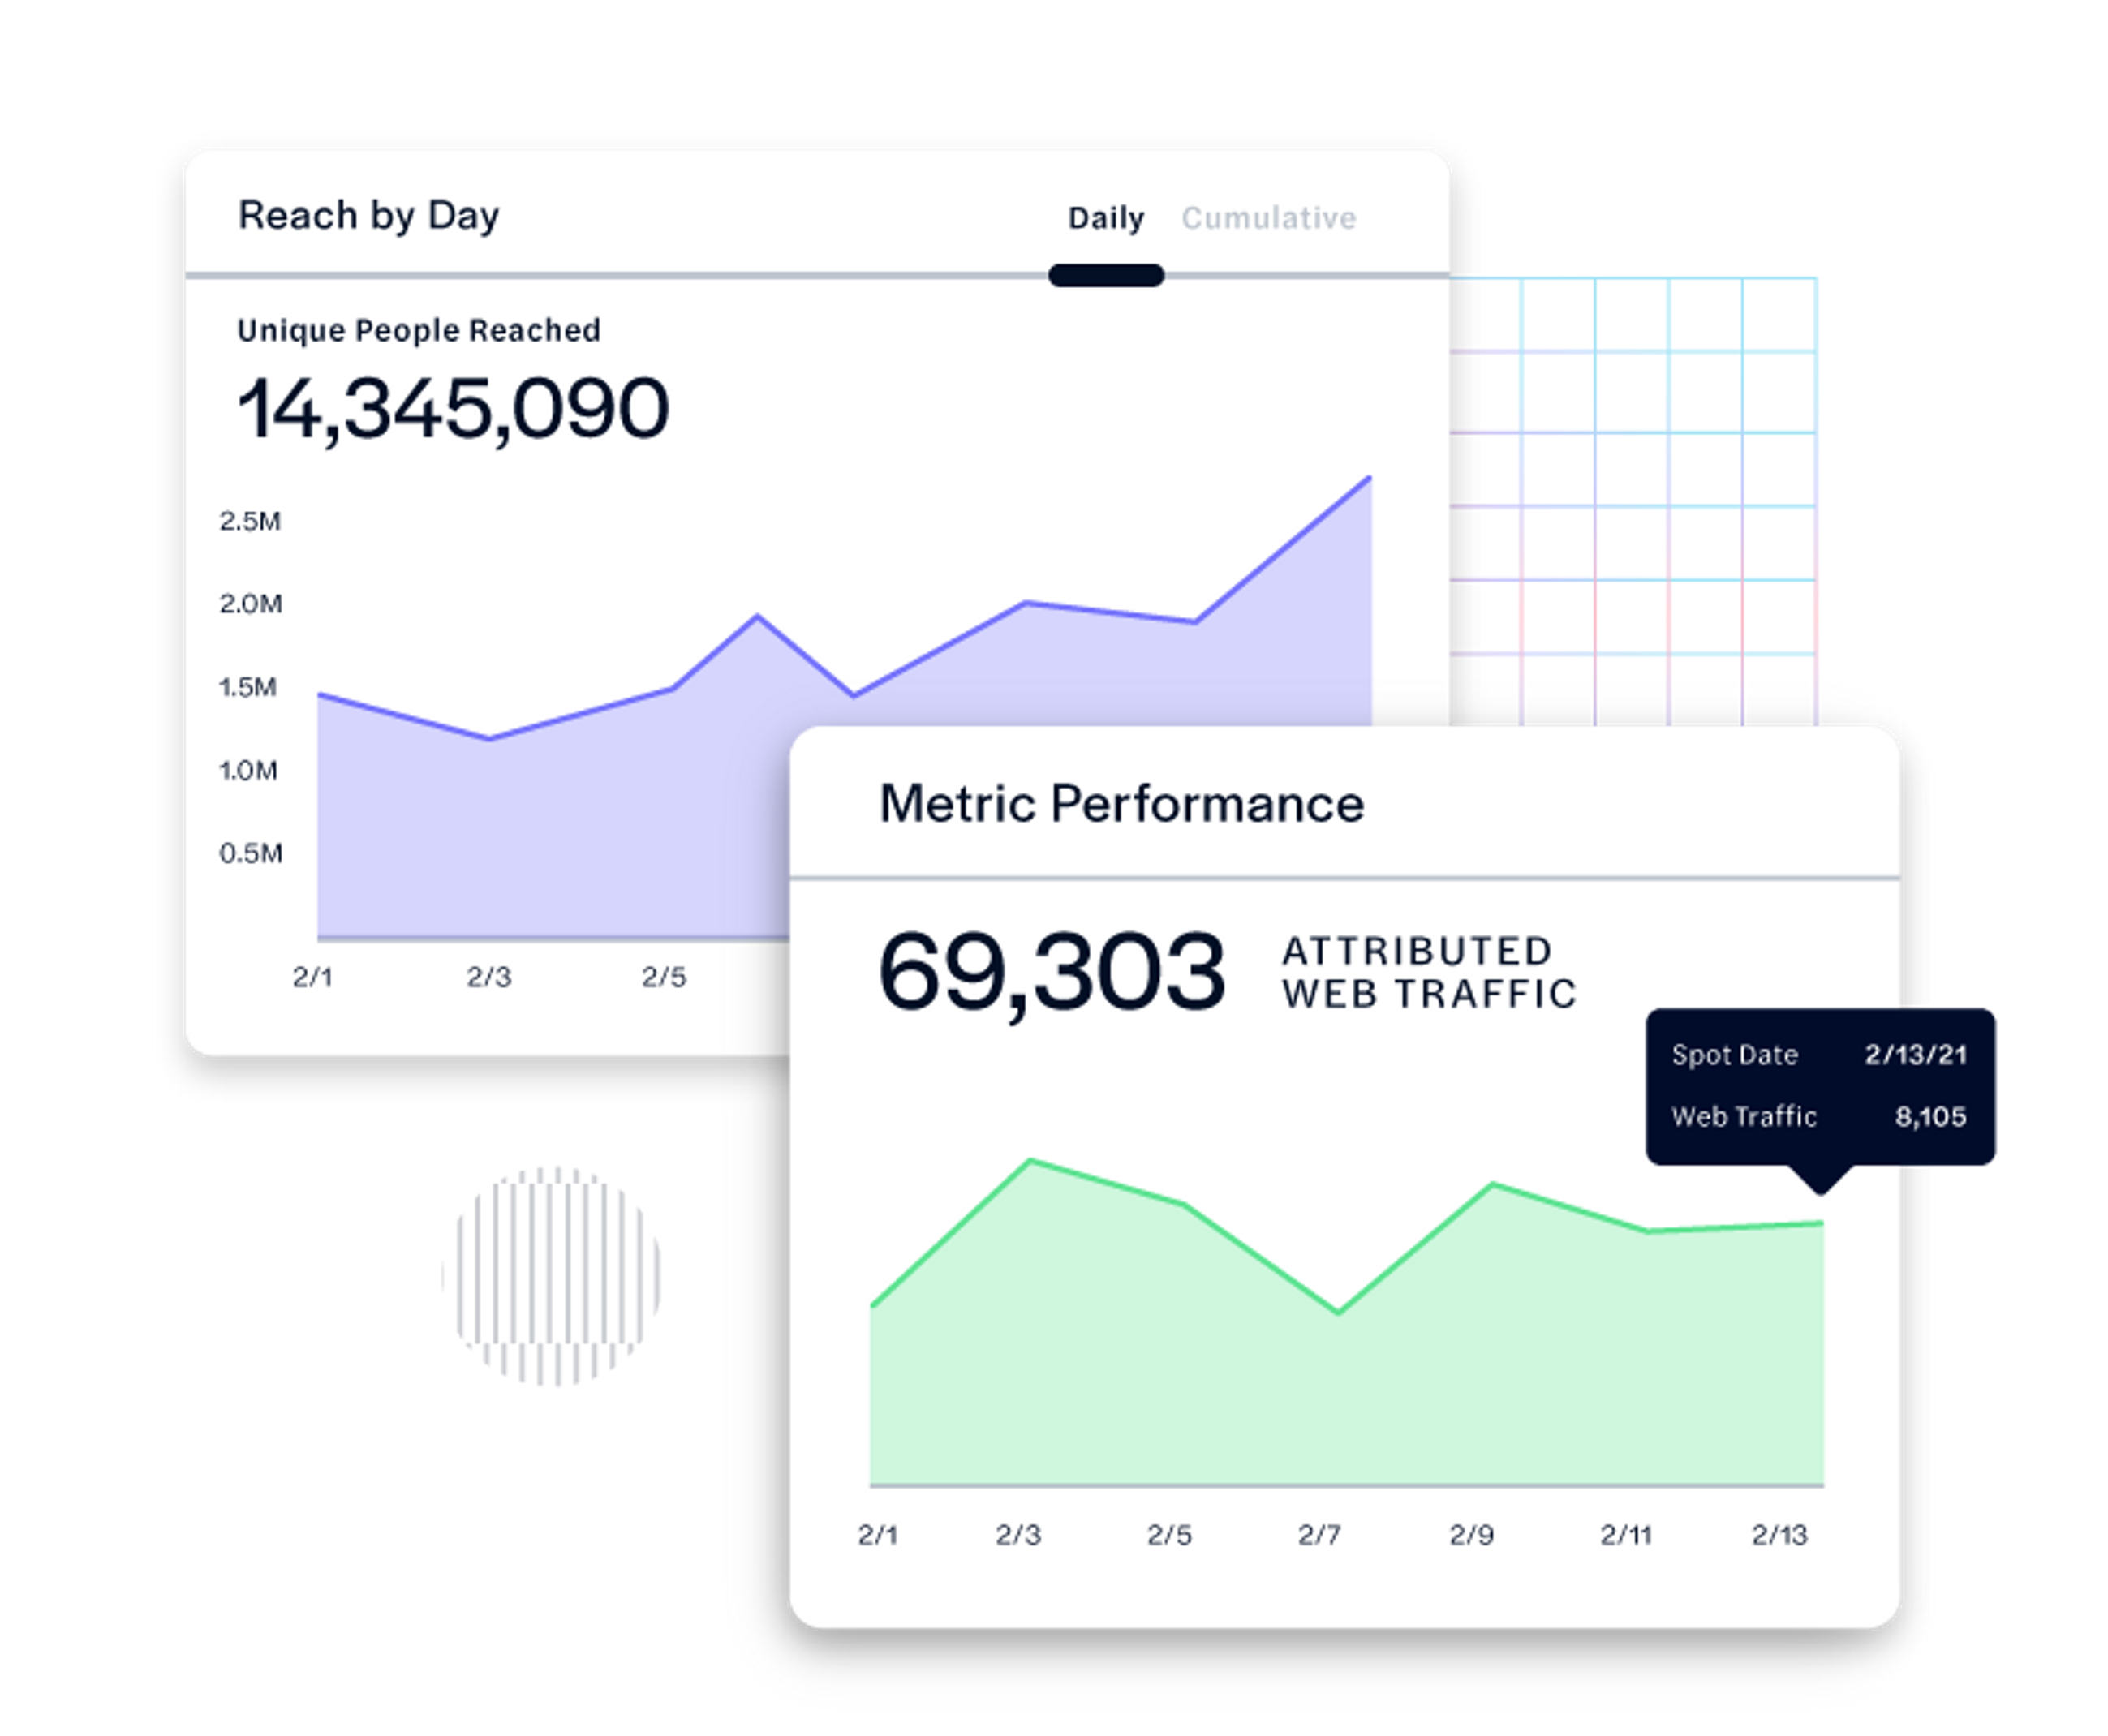 Reach by day and metric performance for linear TV ads and connected TV advertising